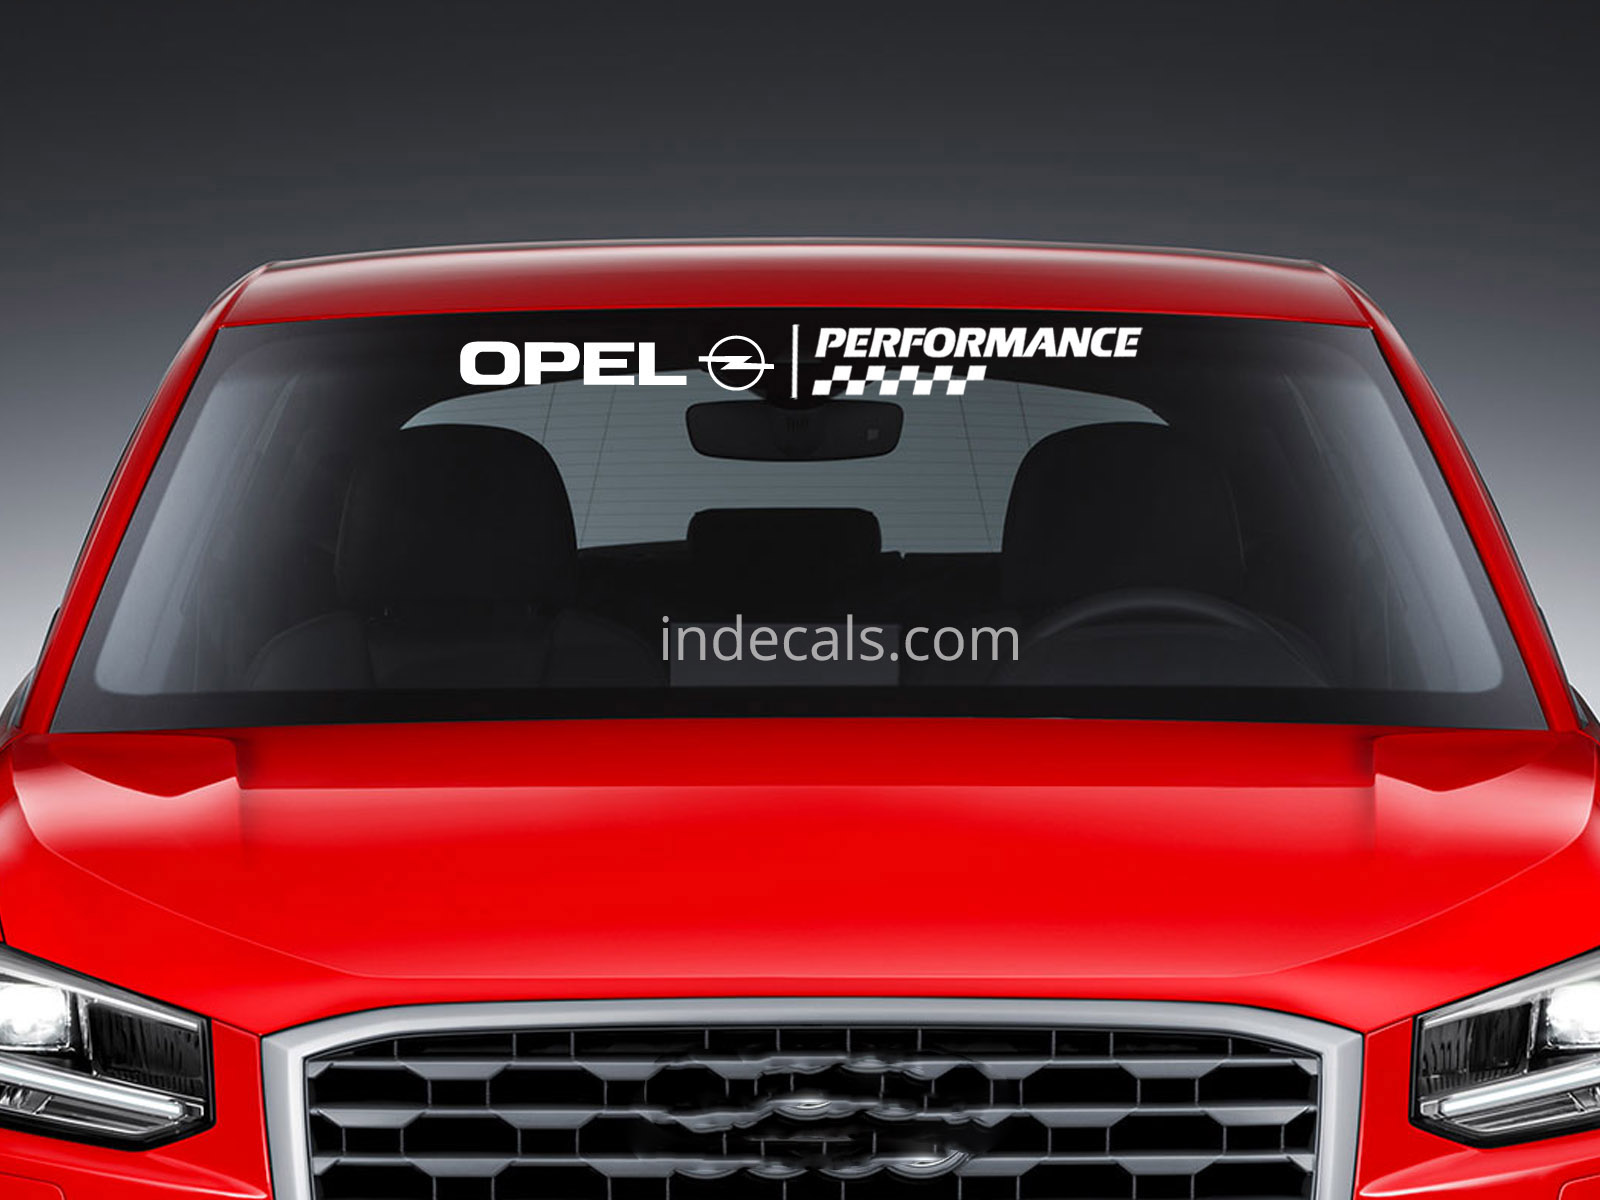 1 x Opel Performance Sticker for Windshield or Back Window - White